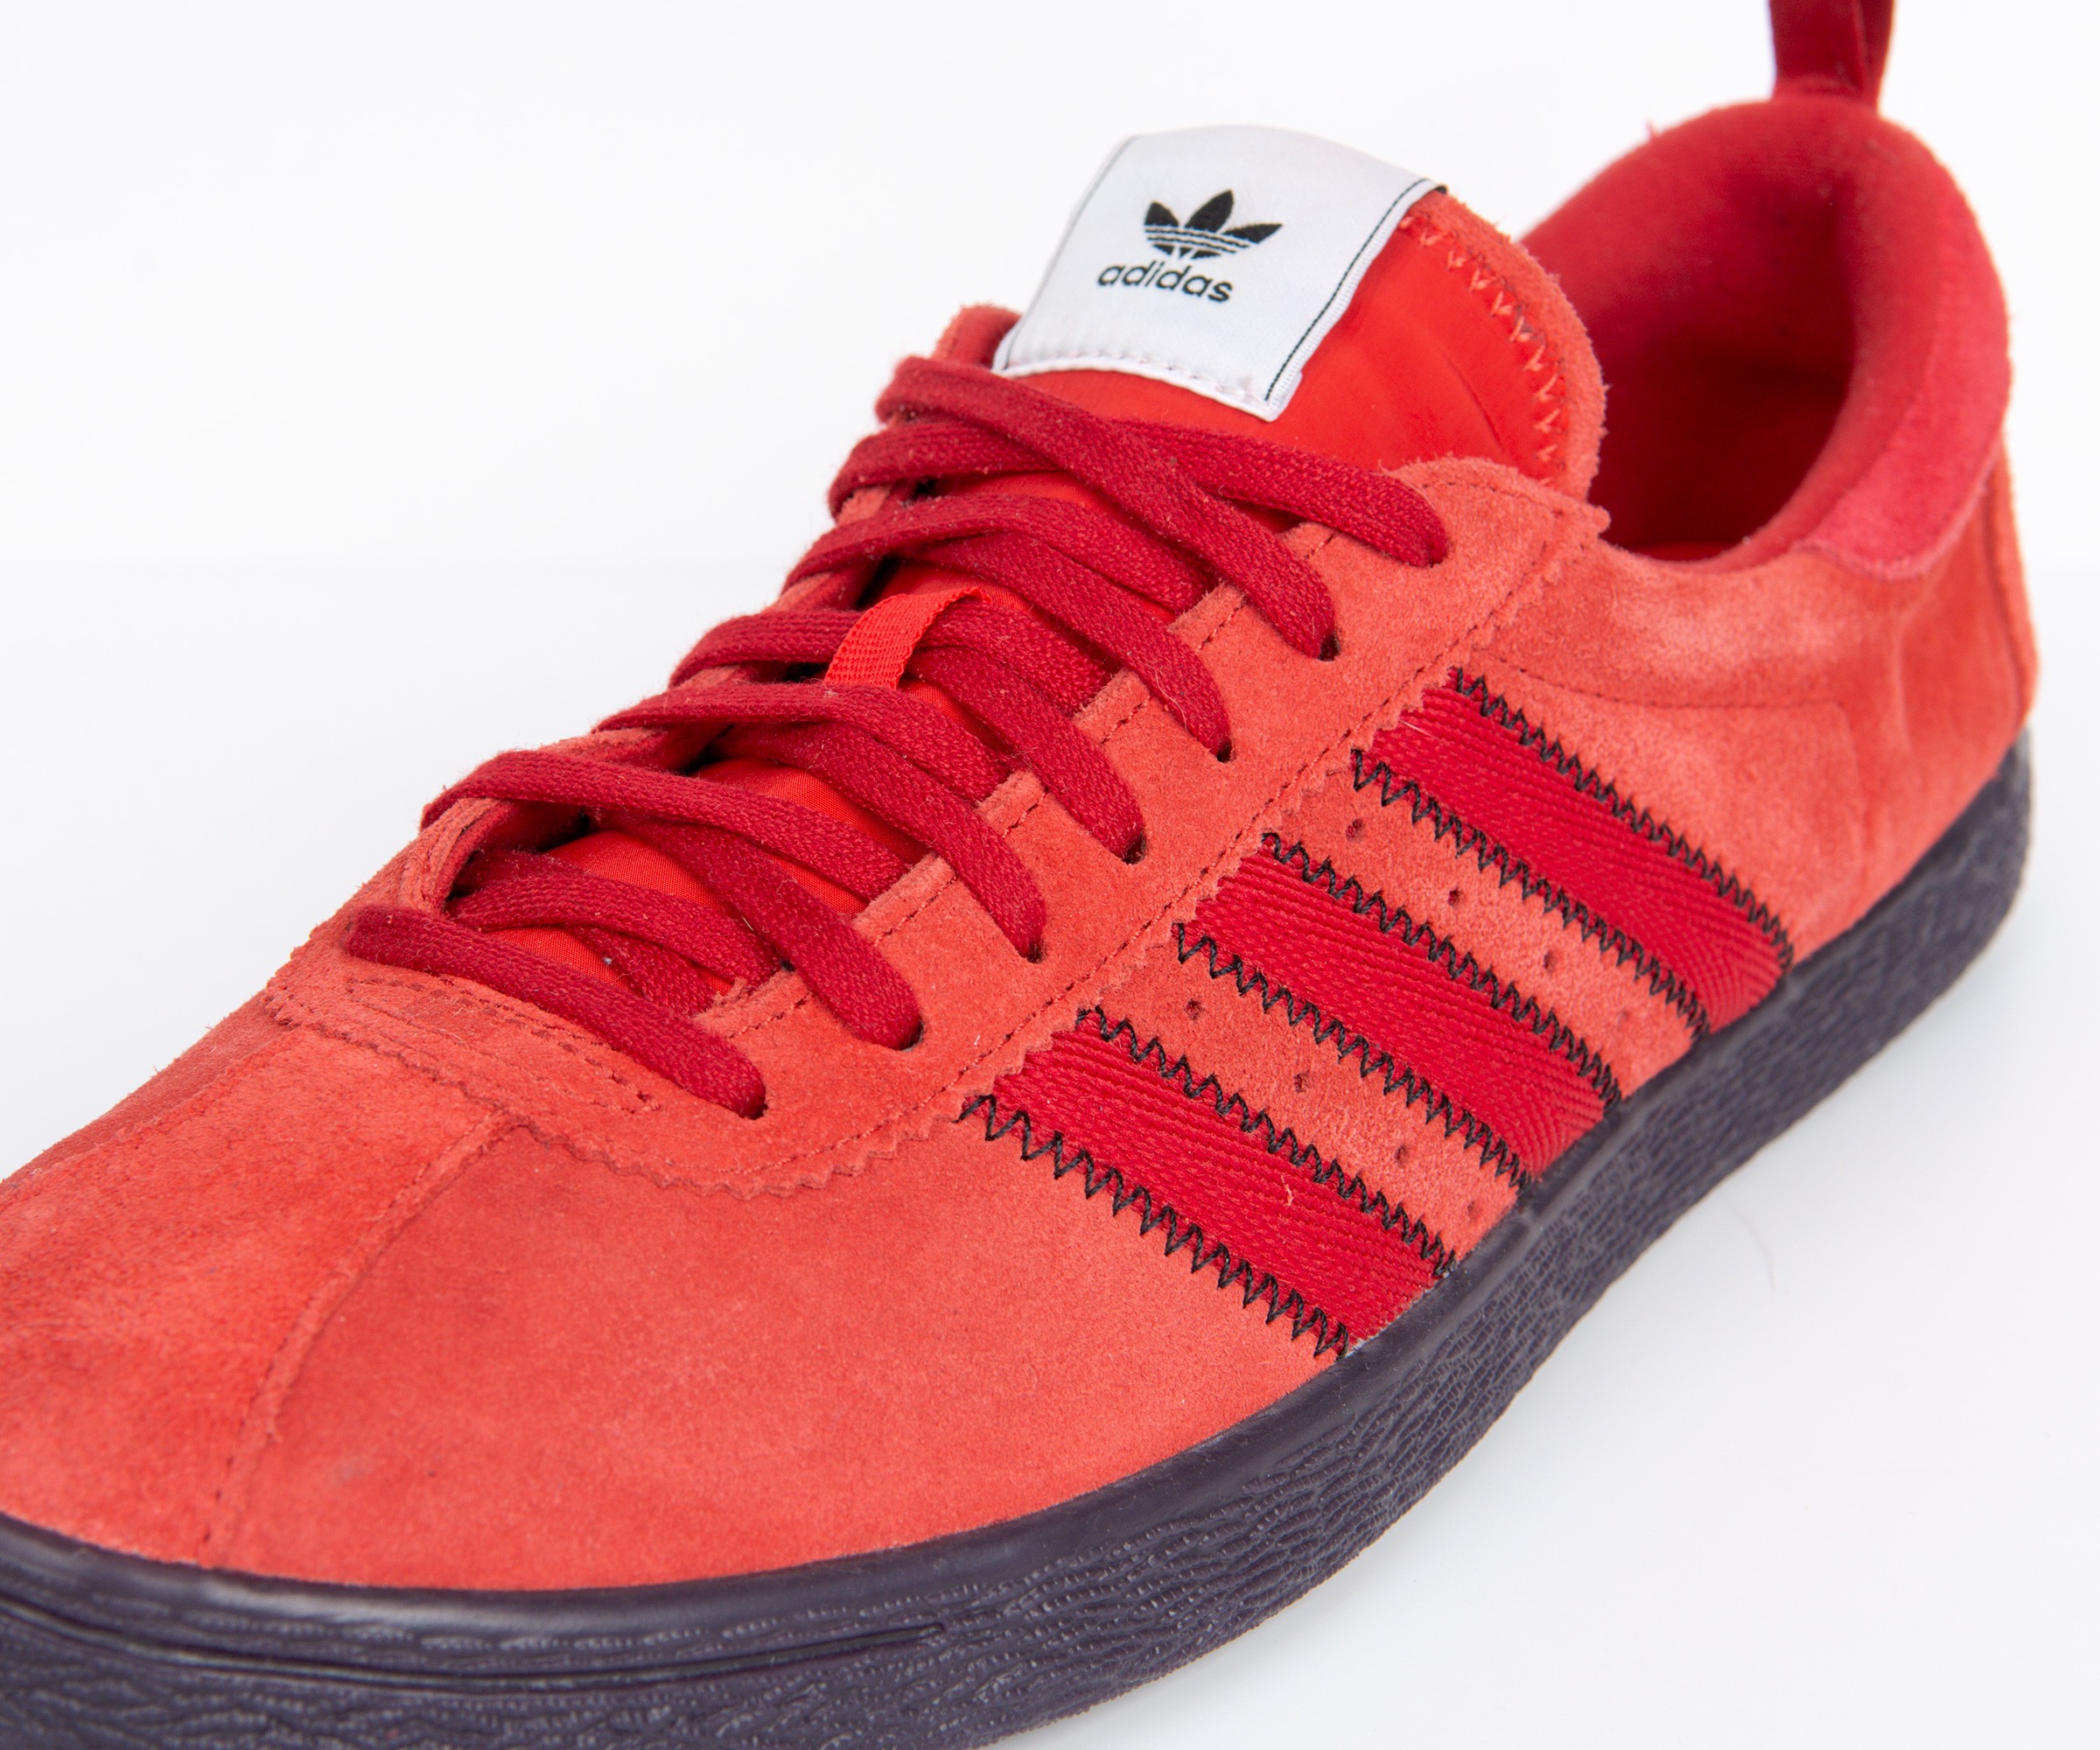 C.P. Company Archive x ADIDAS Tobacco Trainers - ST Brick/Night Red/Surf Red